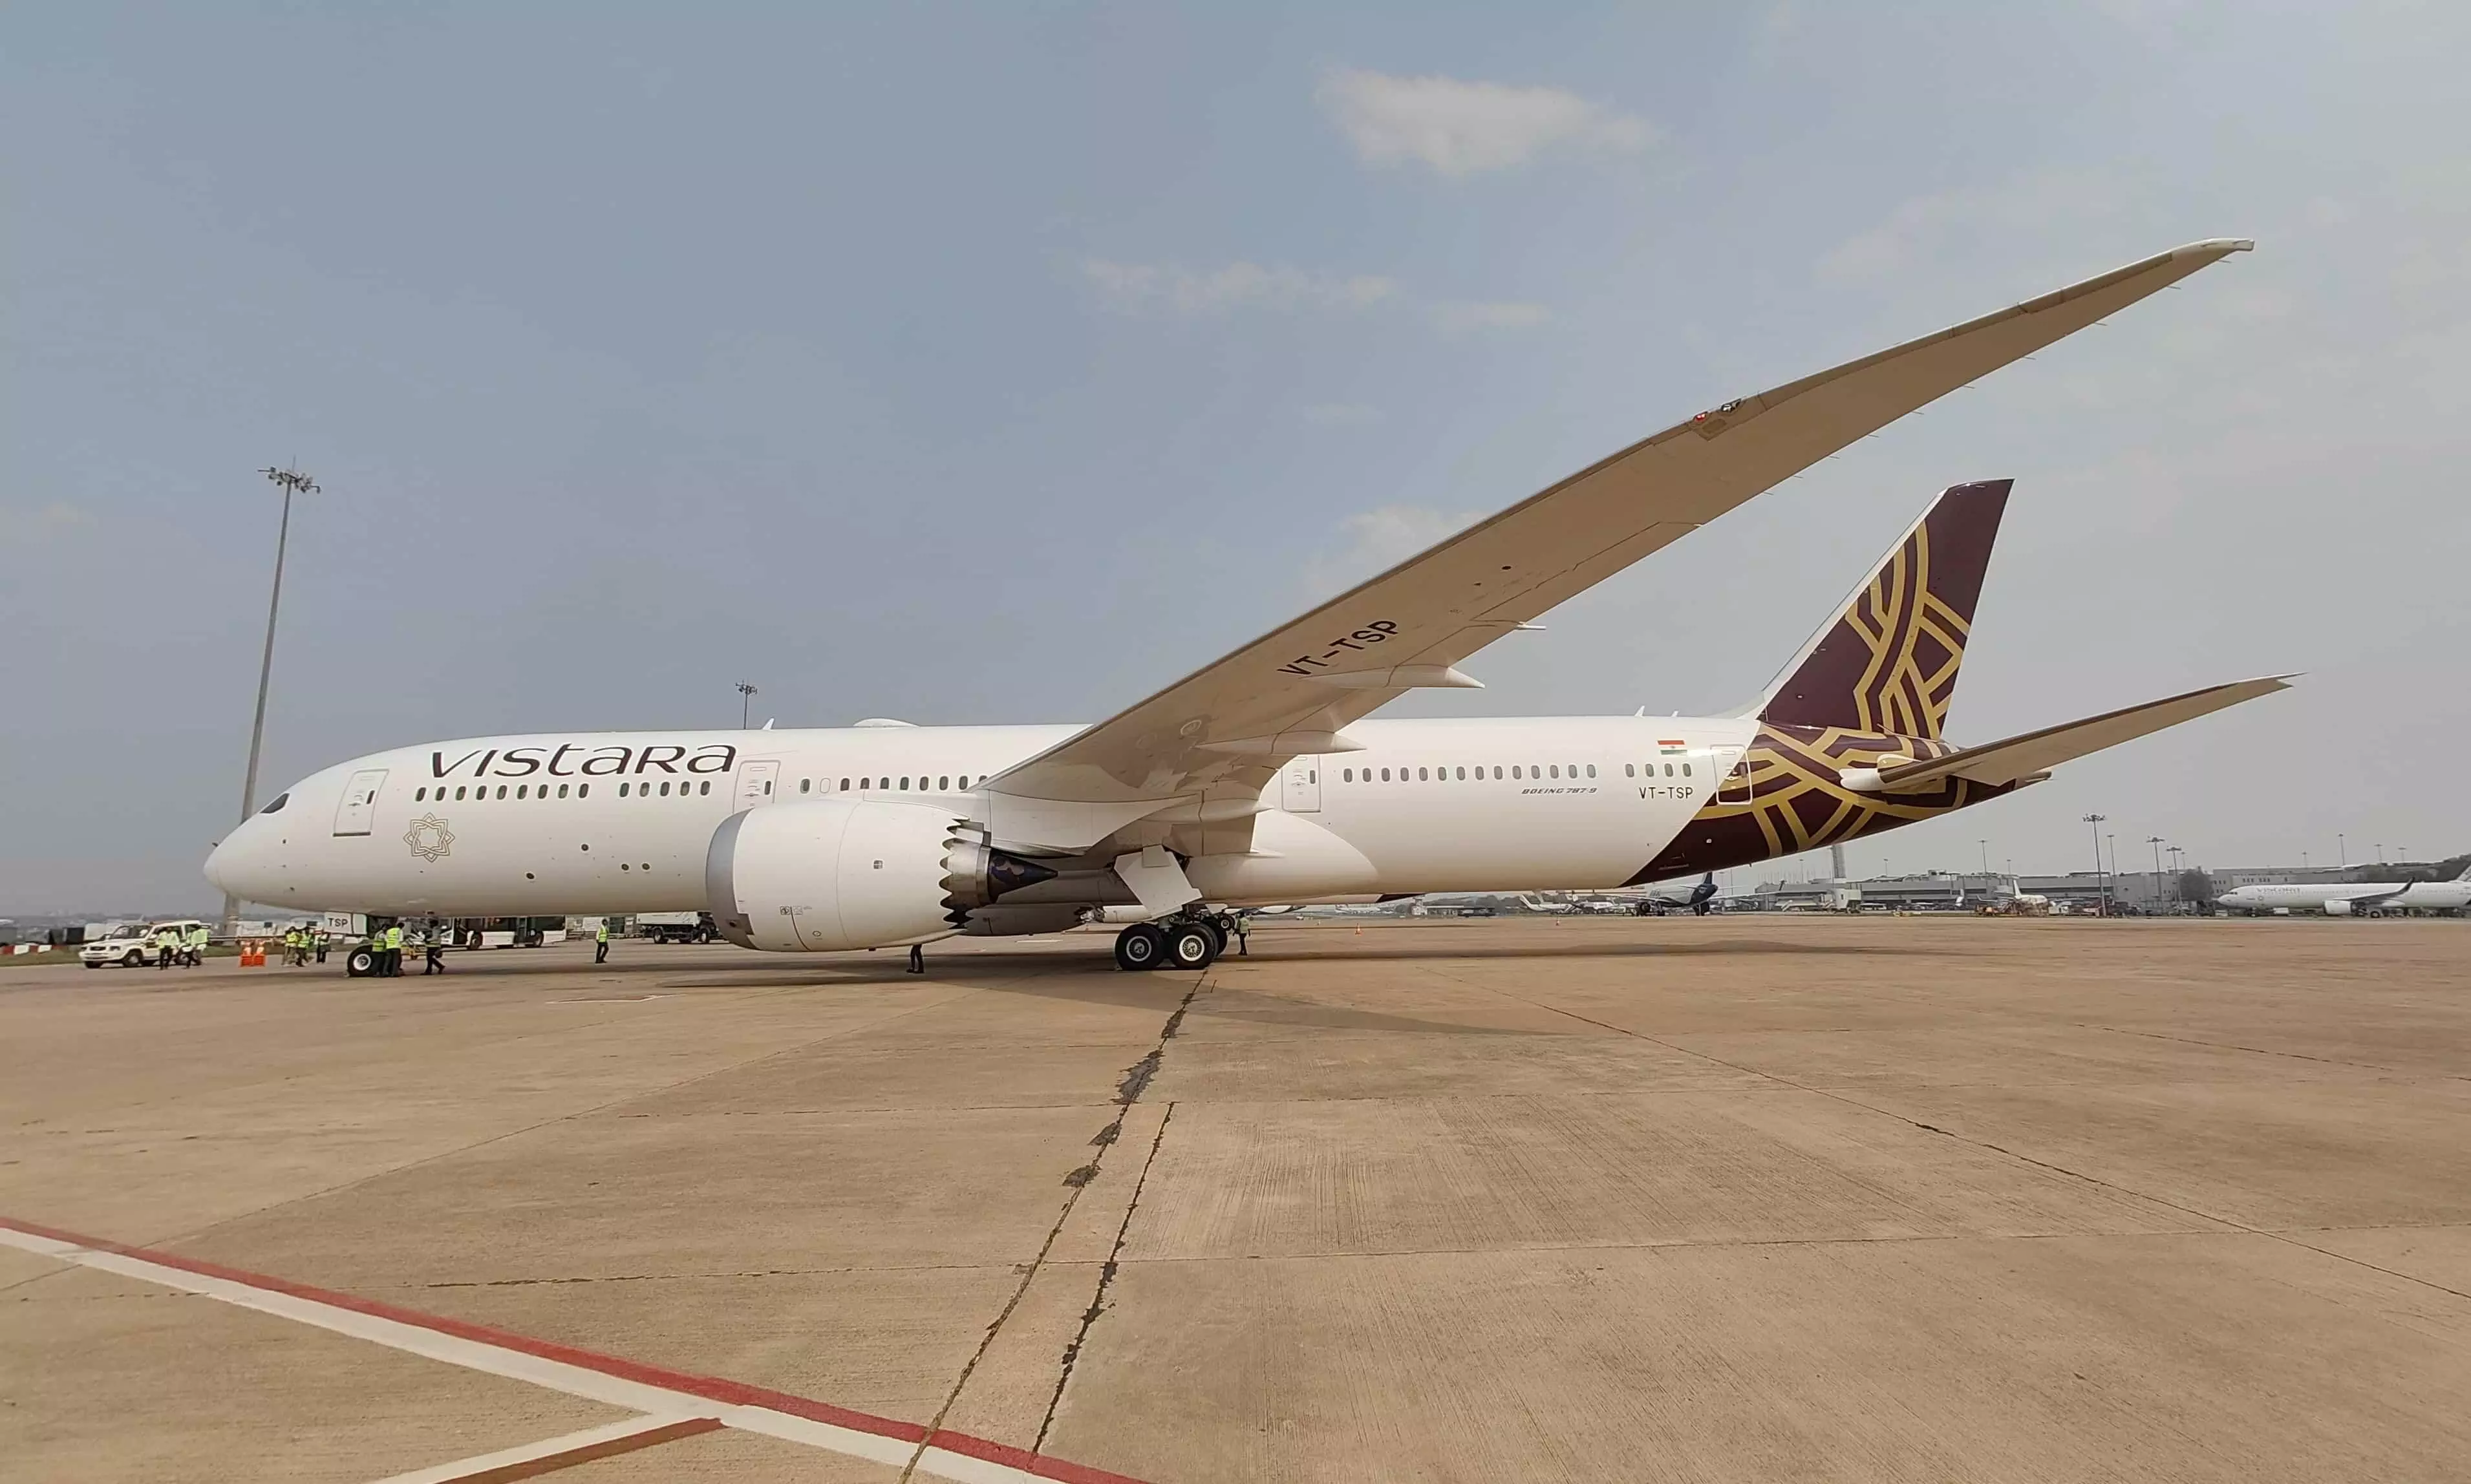 Vistara first Indian airline to operate wide-body aircraft on long haul using SAF